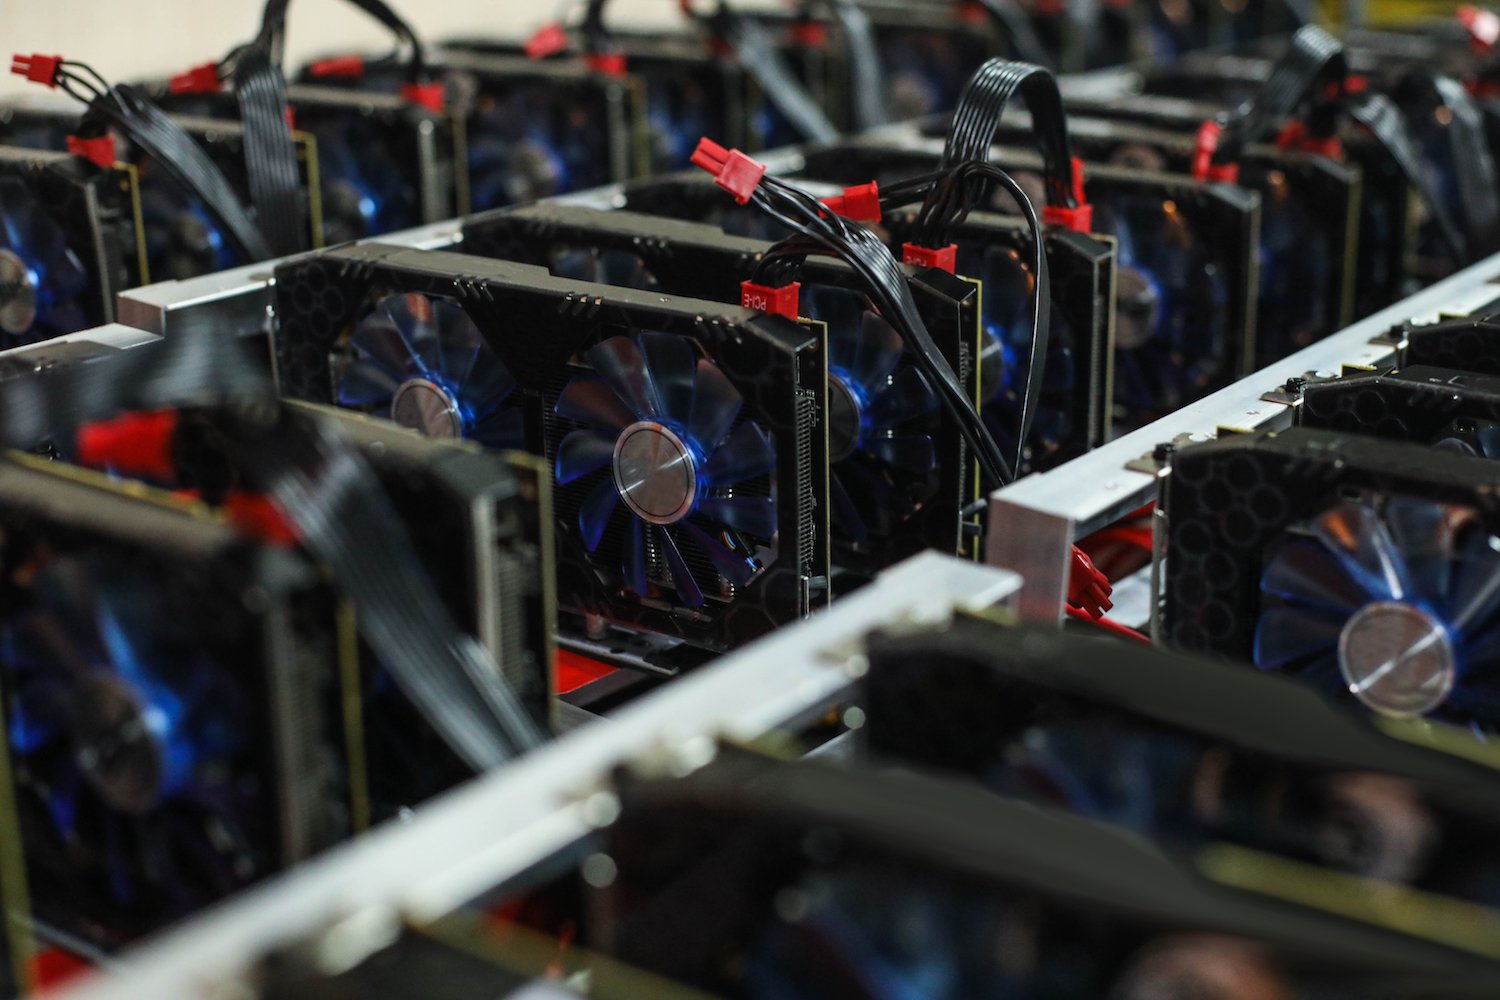 new-amd-graphics-card-sells-out-in-minutes-amid-crypto-mining-boom.jpg